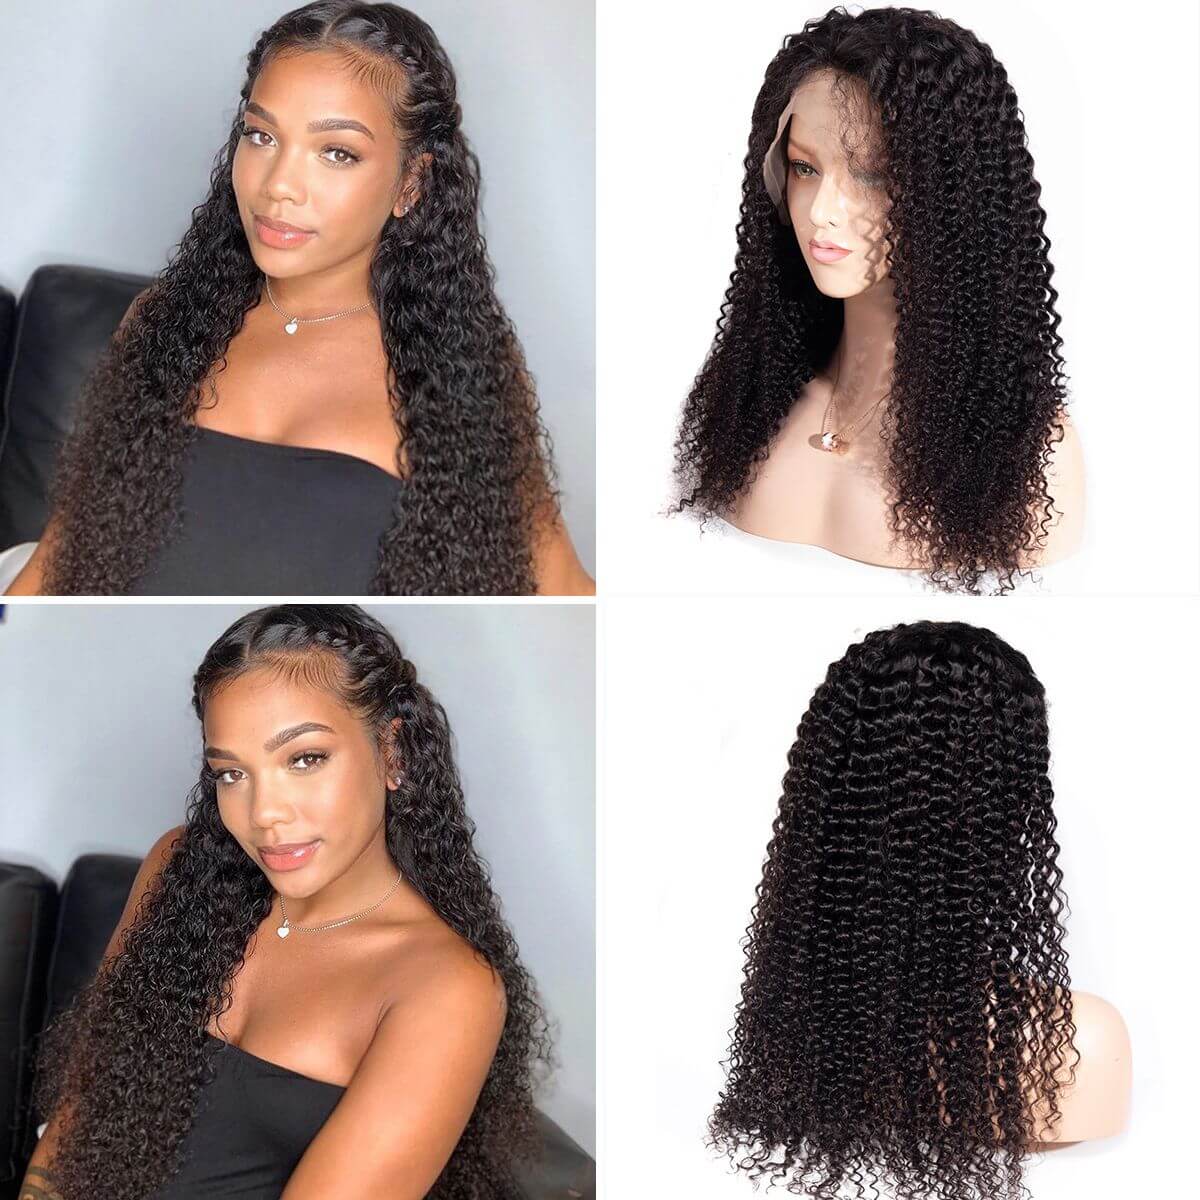 360 curly wave wig,360 curly lace wig,360 curly wave frontal wigs,curly wave 360 lace frontal wigs,curly wave lace front wig,360 lace front wig,curly 360 front wig